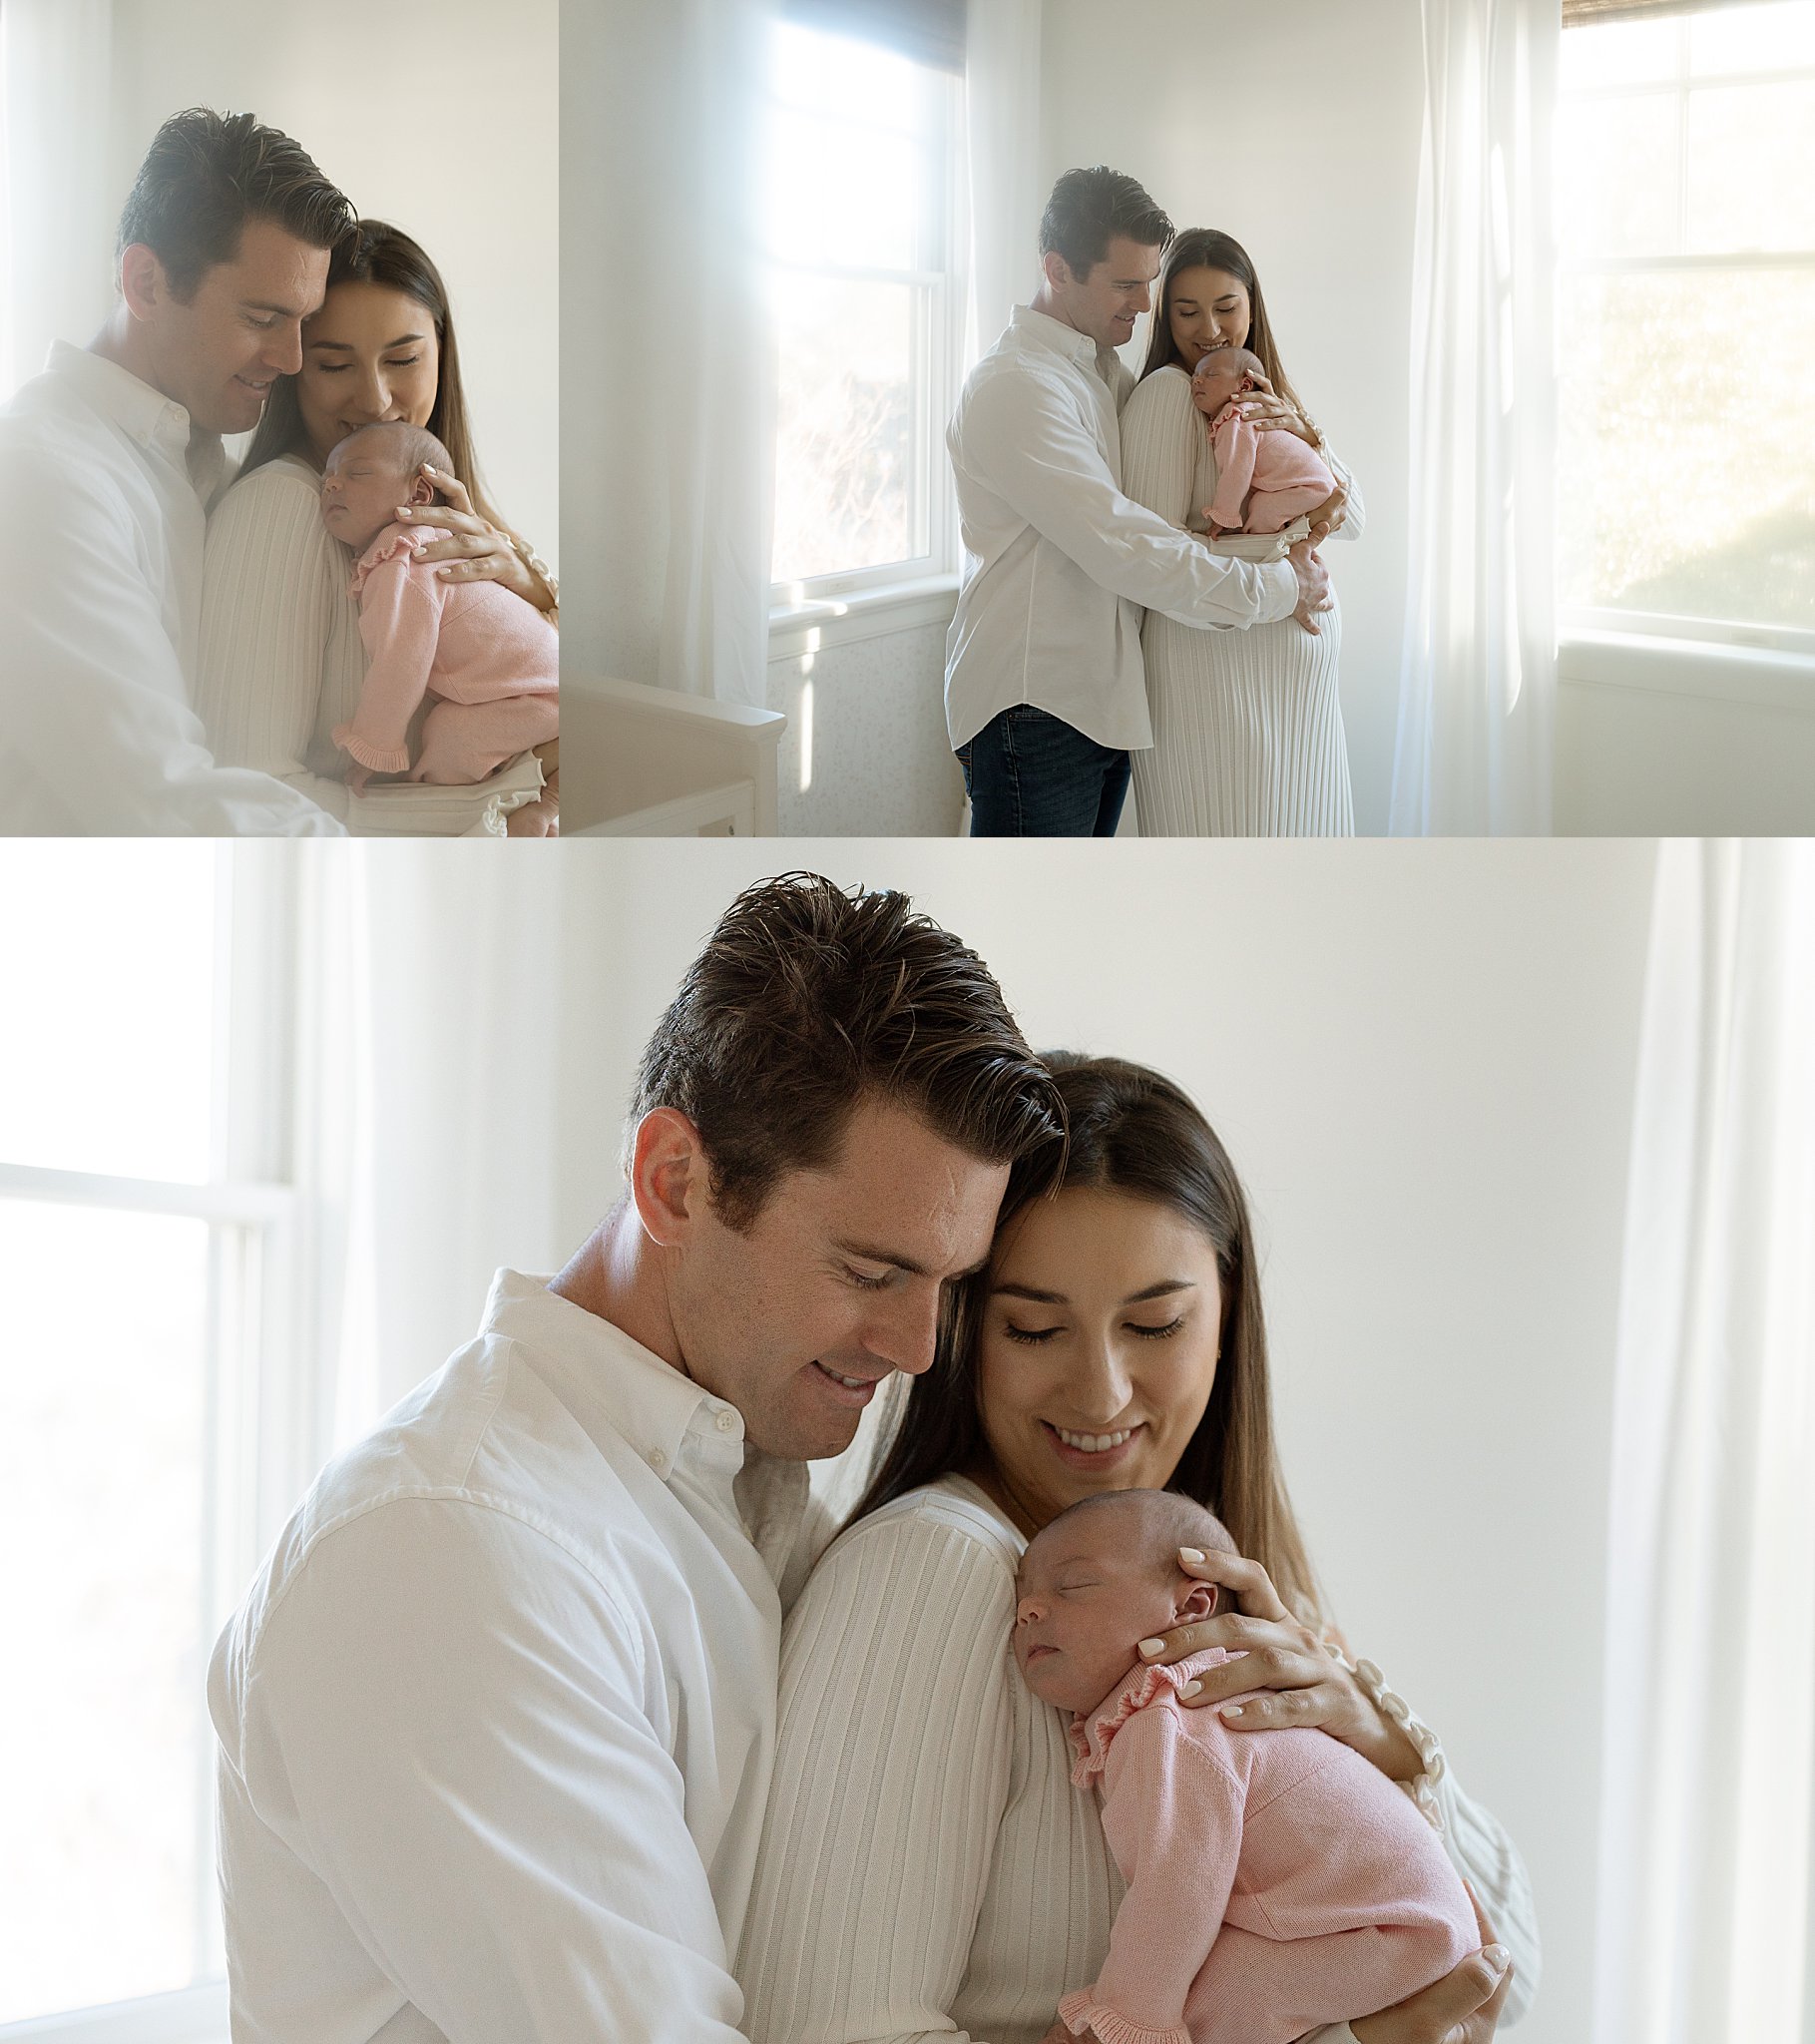 man bugs woman from behind as she holds baby by Virginia Beach Newborn Photographer